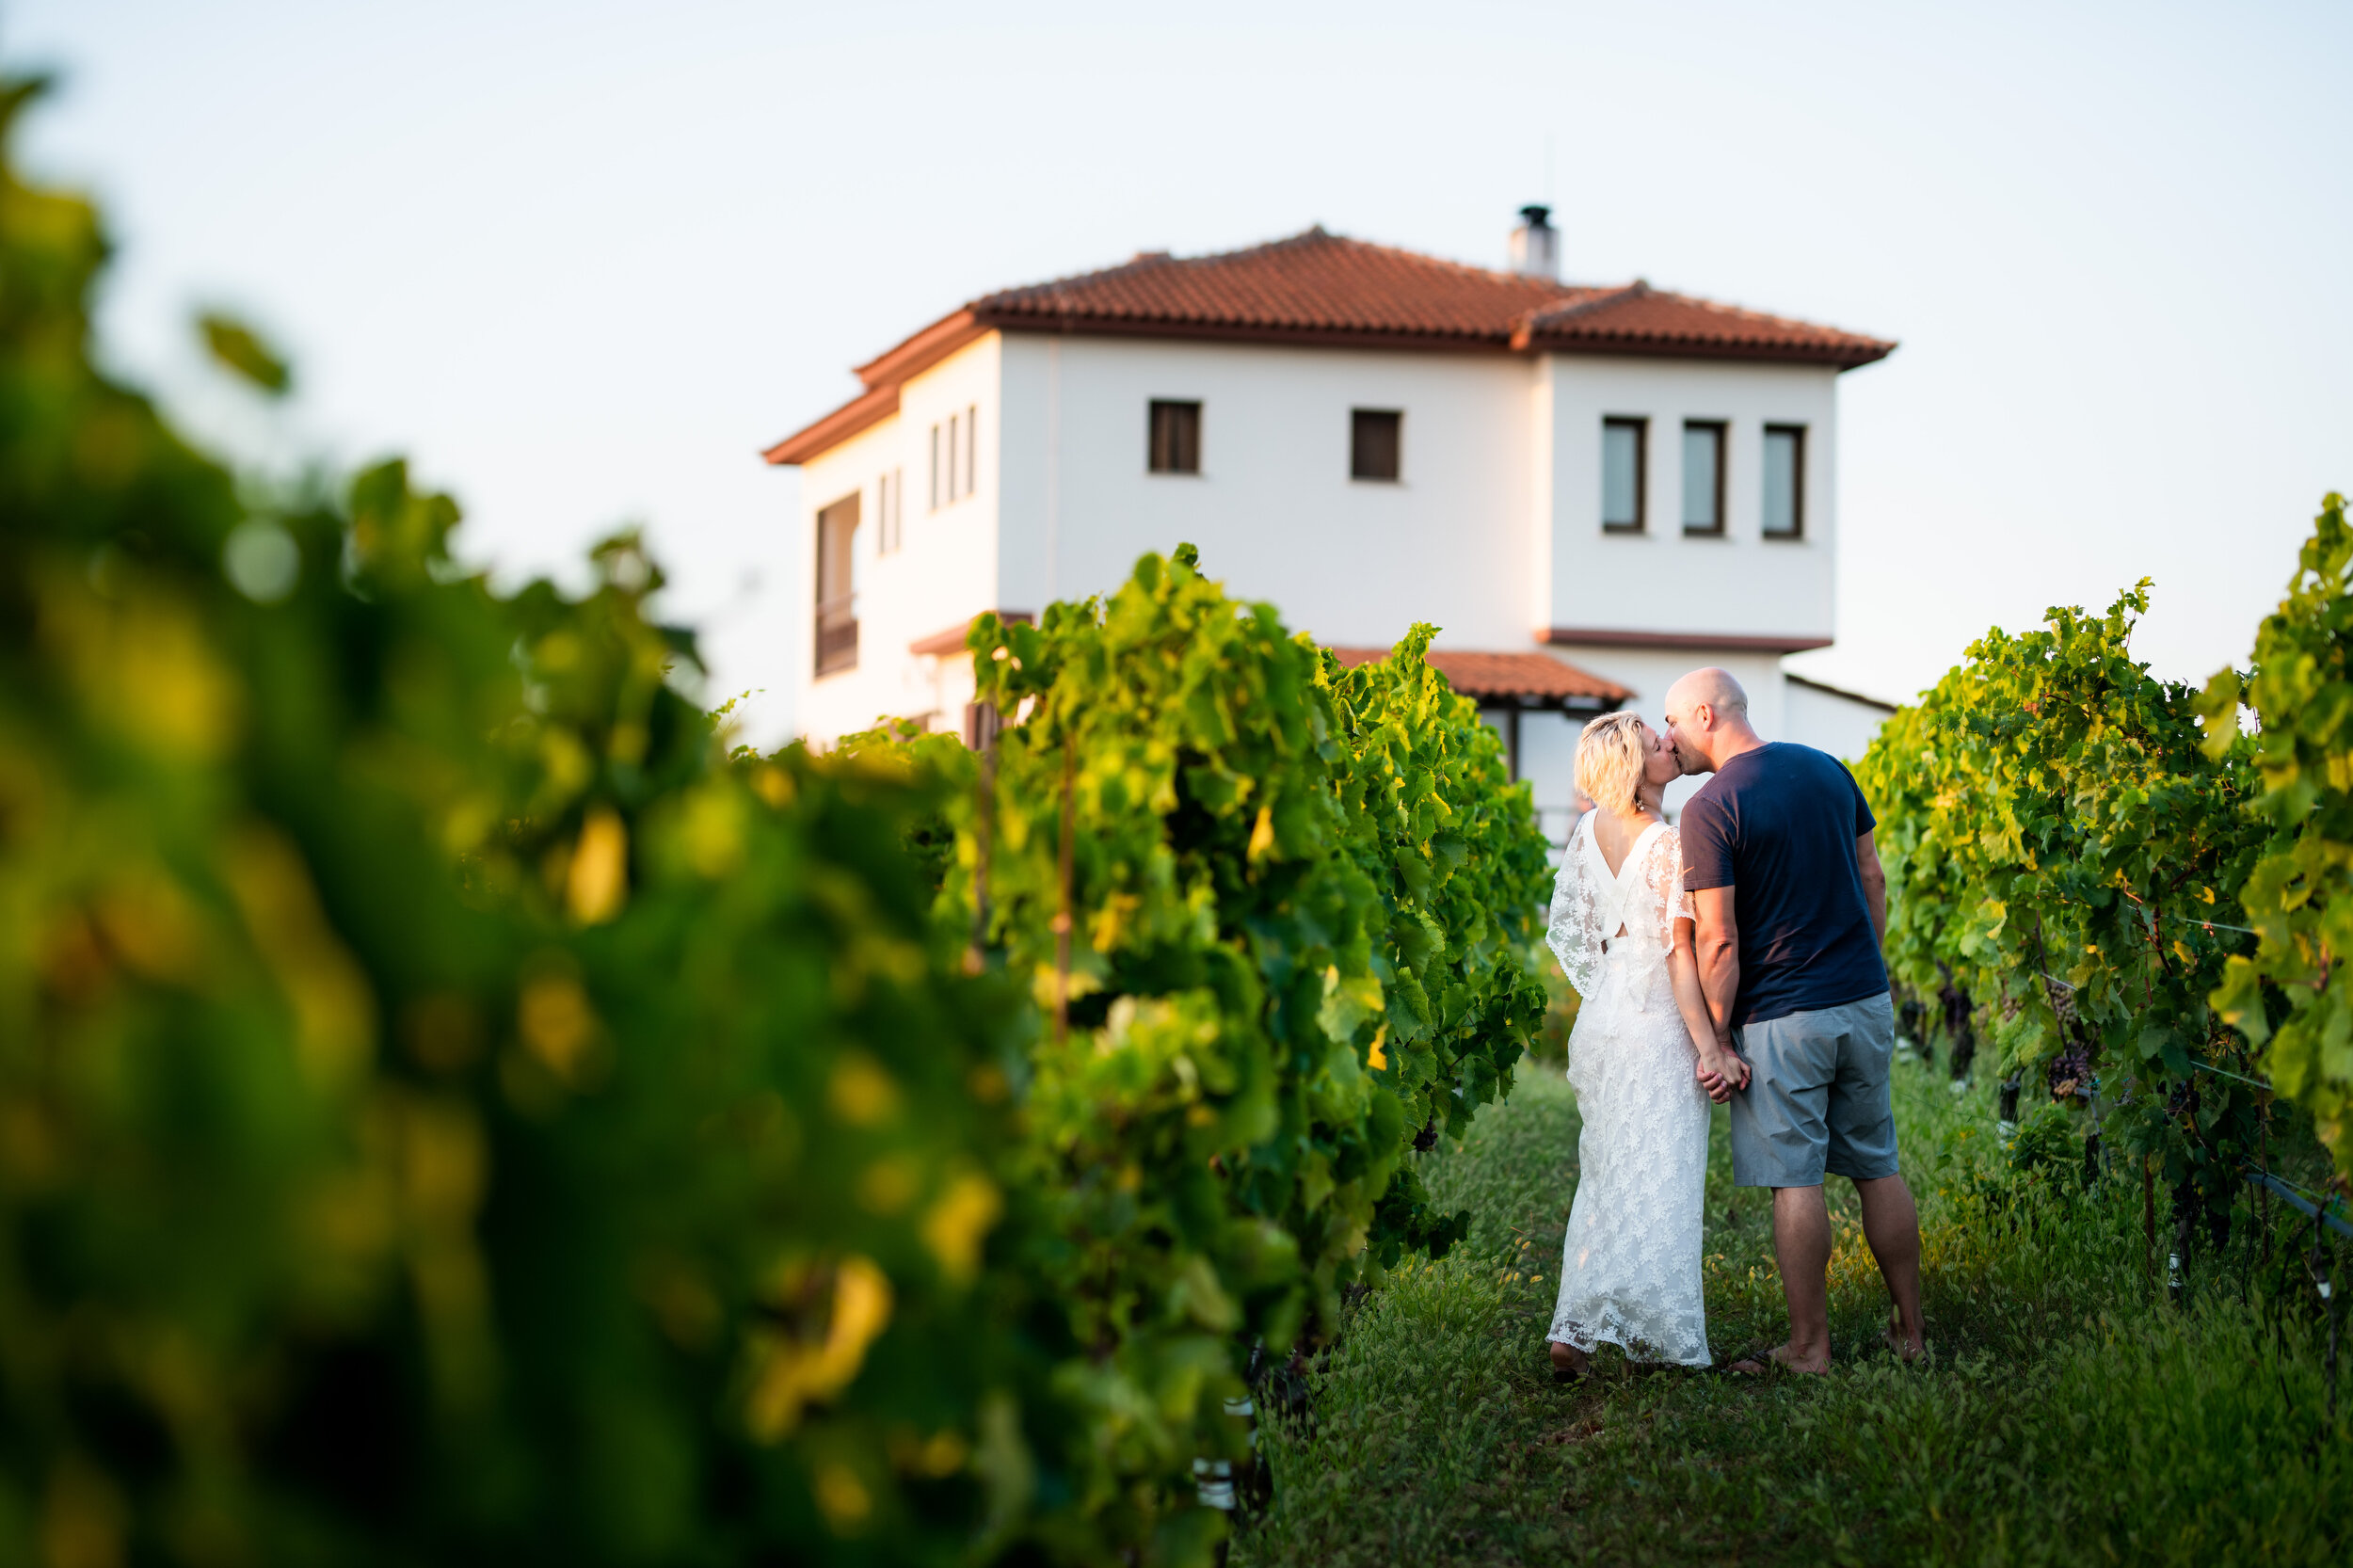 Bride and groom sunset portraits at Patistis Vineyards in Greece:  photo of destination wedding in Greece by J. Brown Photography.